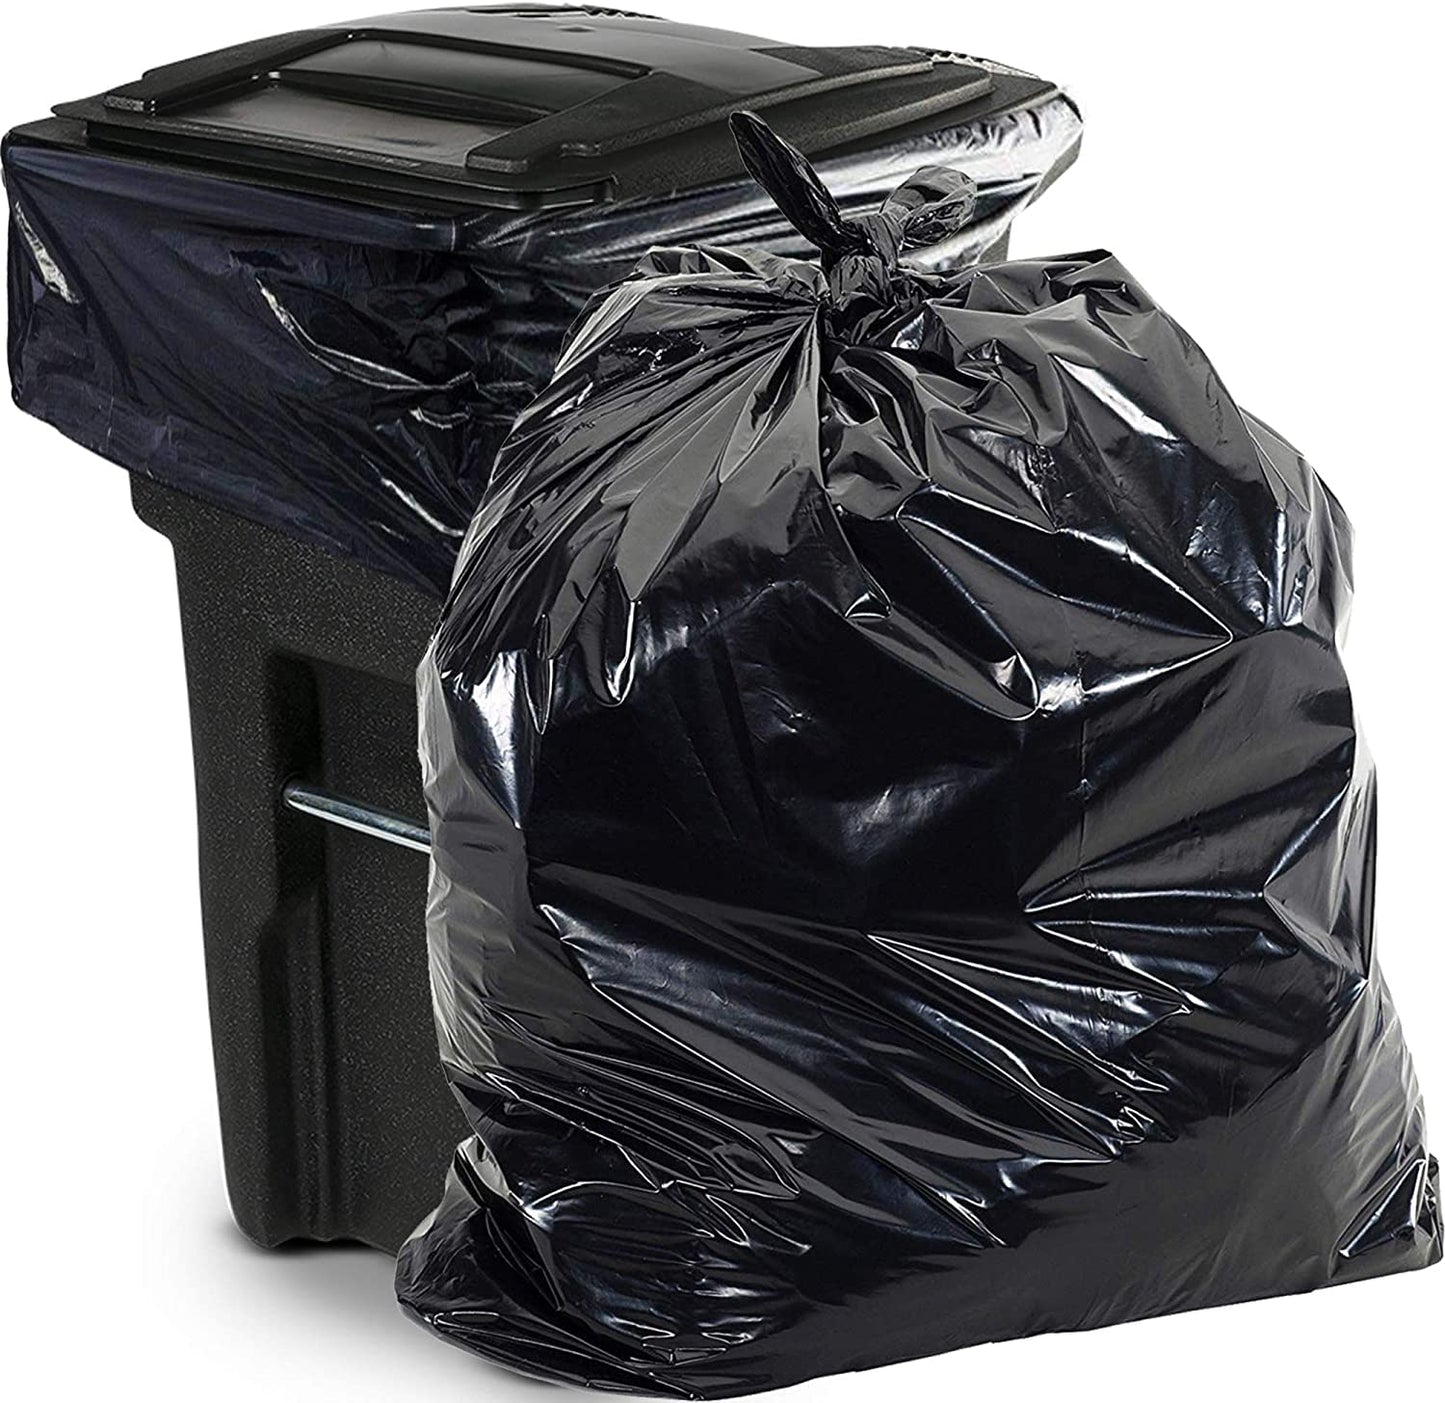 Plastic Industrial Garbage Bag - 1.5 mil, 38x58 inches - 100 bags per box (Set of 10 Boxes)